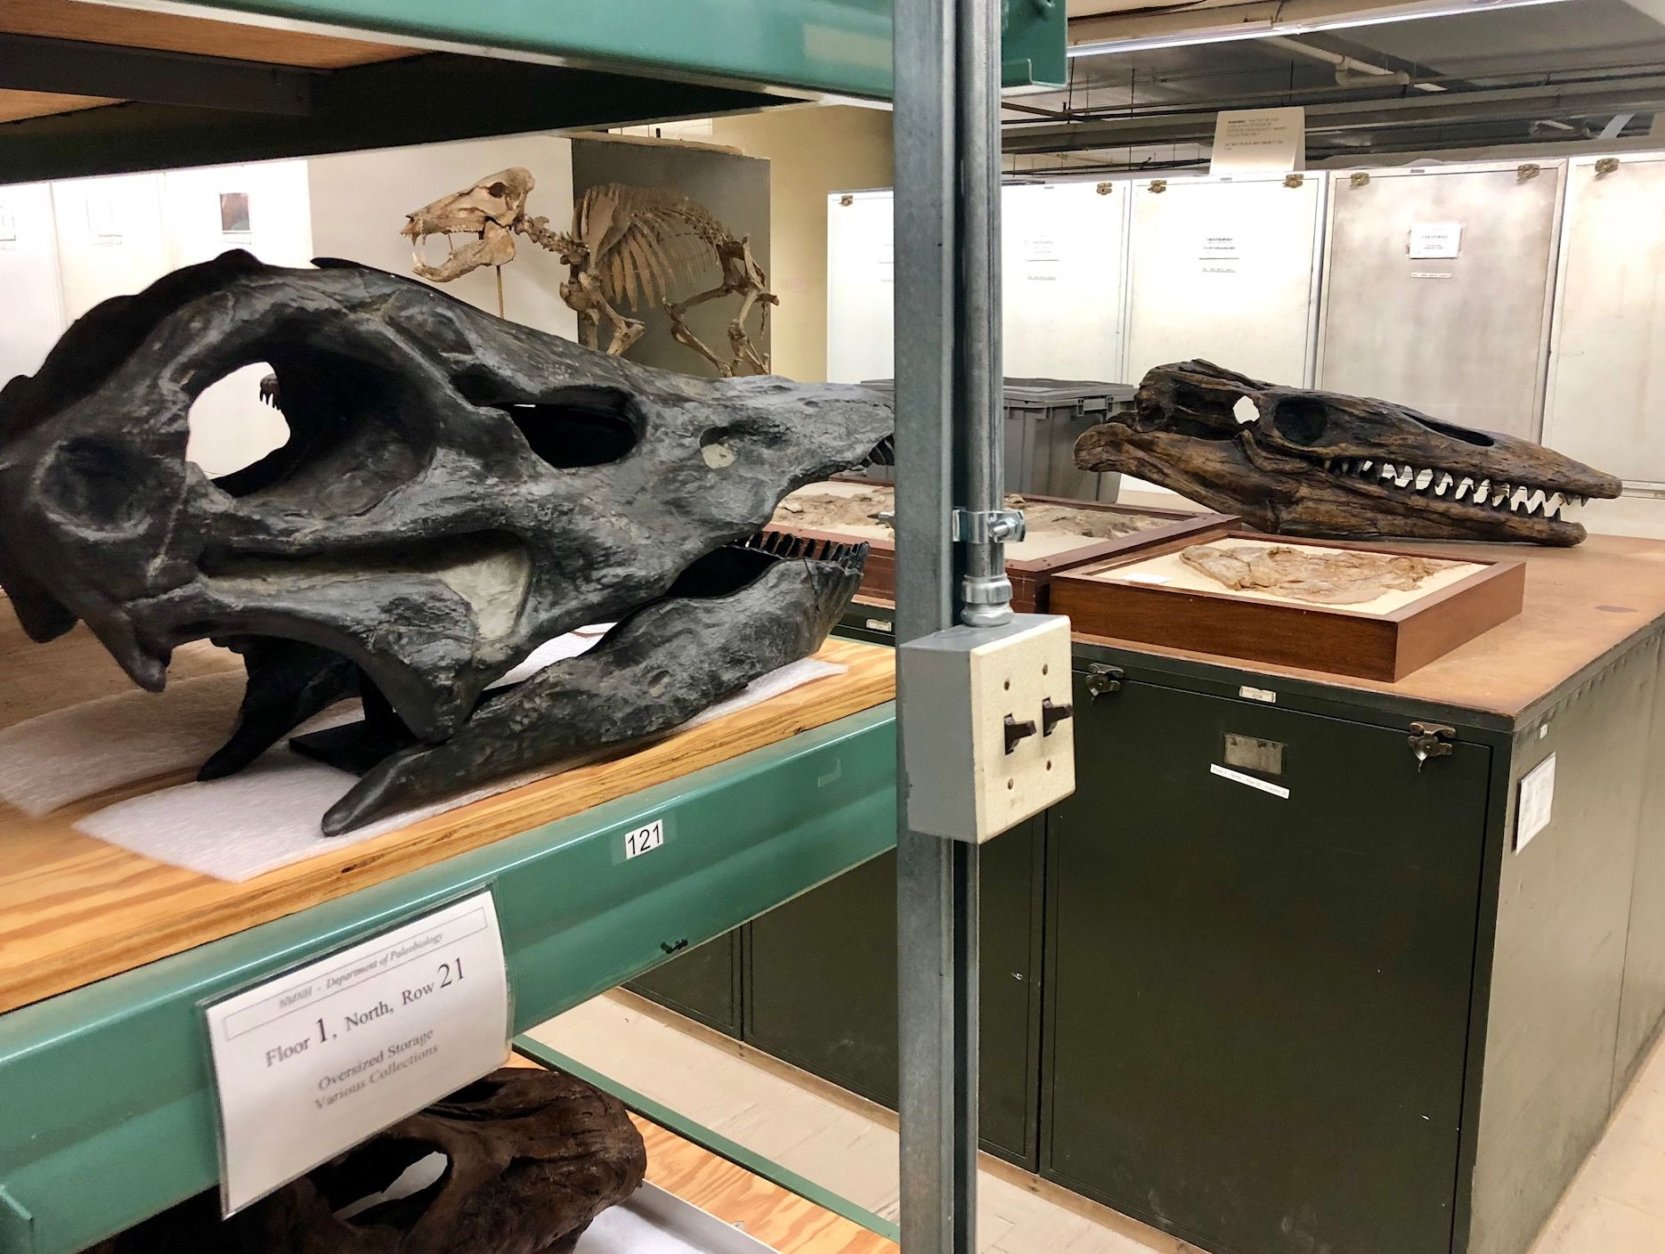 With the deadline of the fossil hall's opening next June looming large, the crunch is on to tell the story of more than 700 rare specimens. (WTOP/Megan Cloherty)